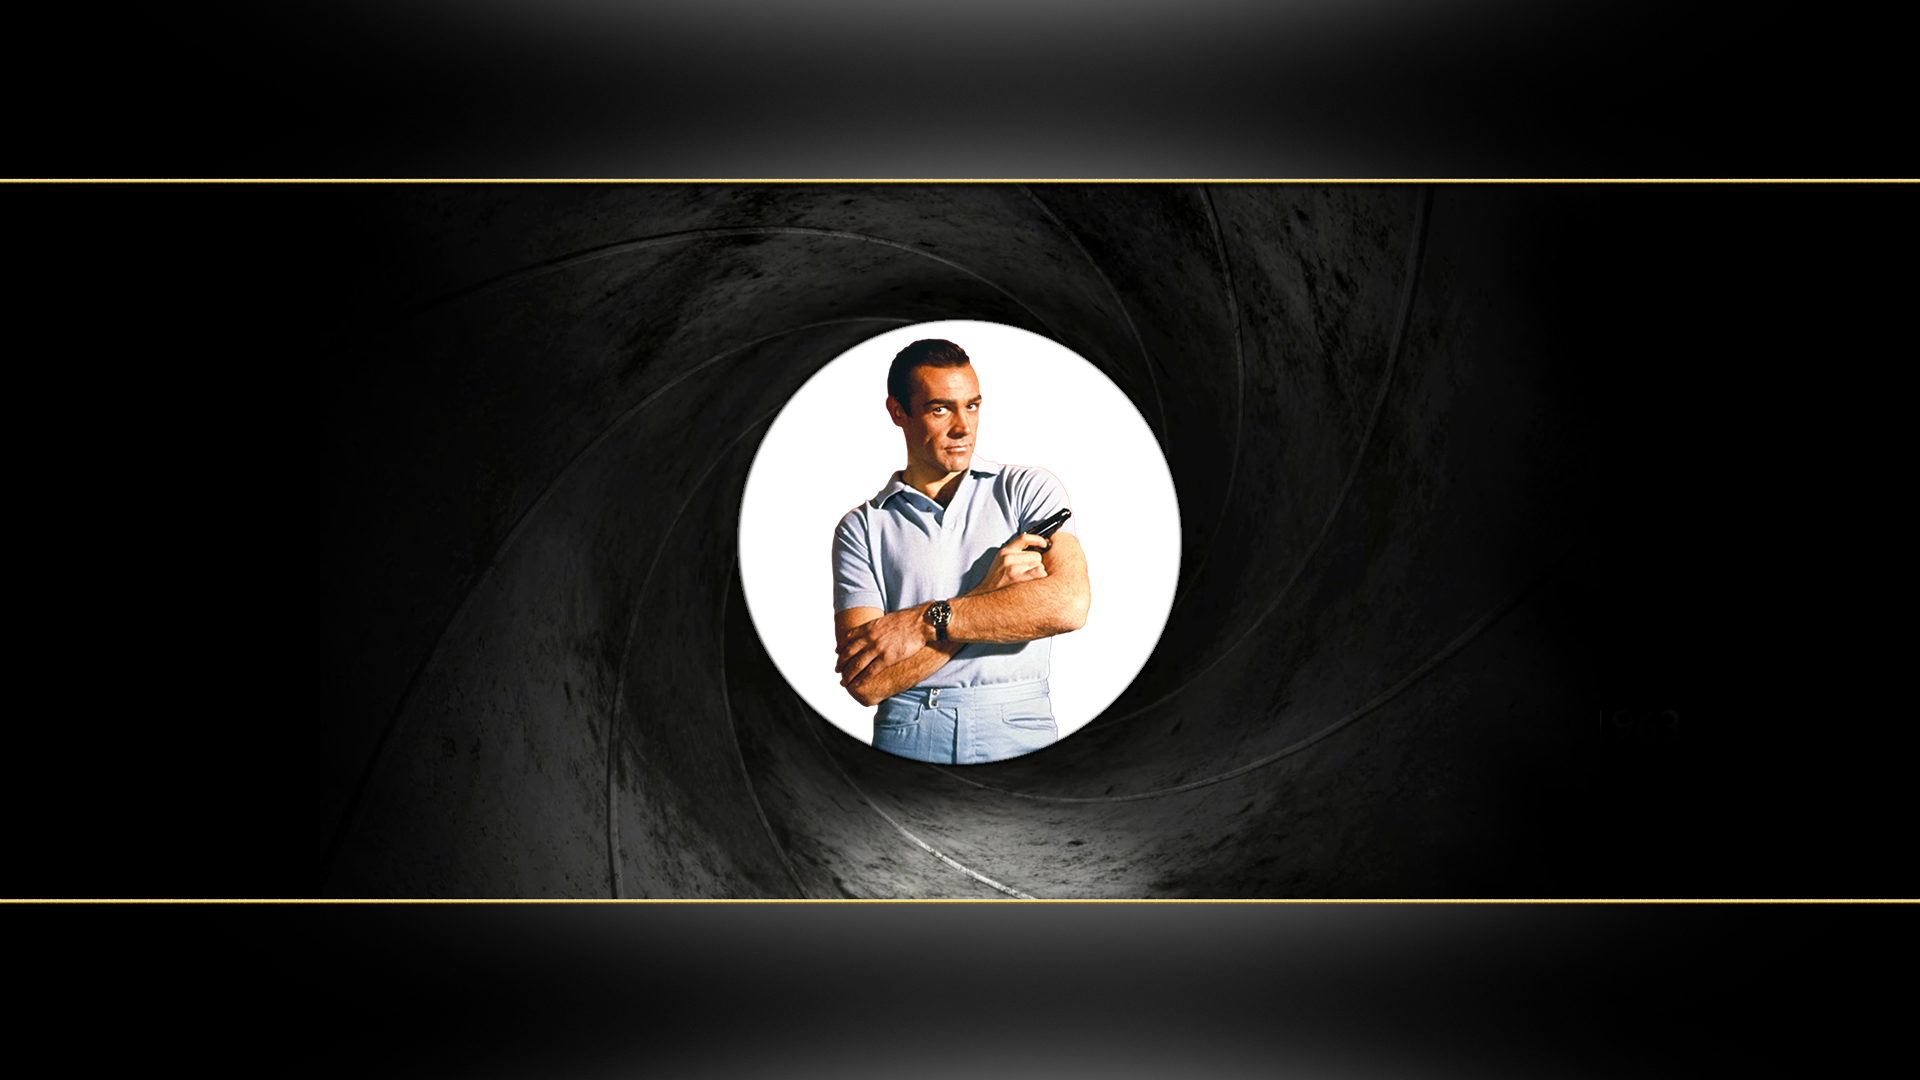 Movie Dr. No HD Wallpaper | Background Image